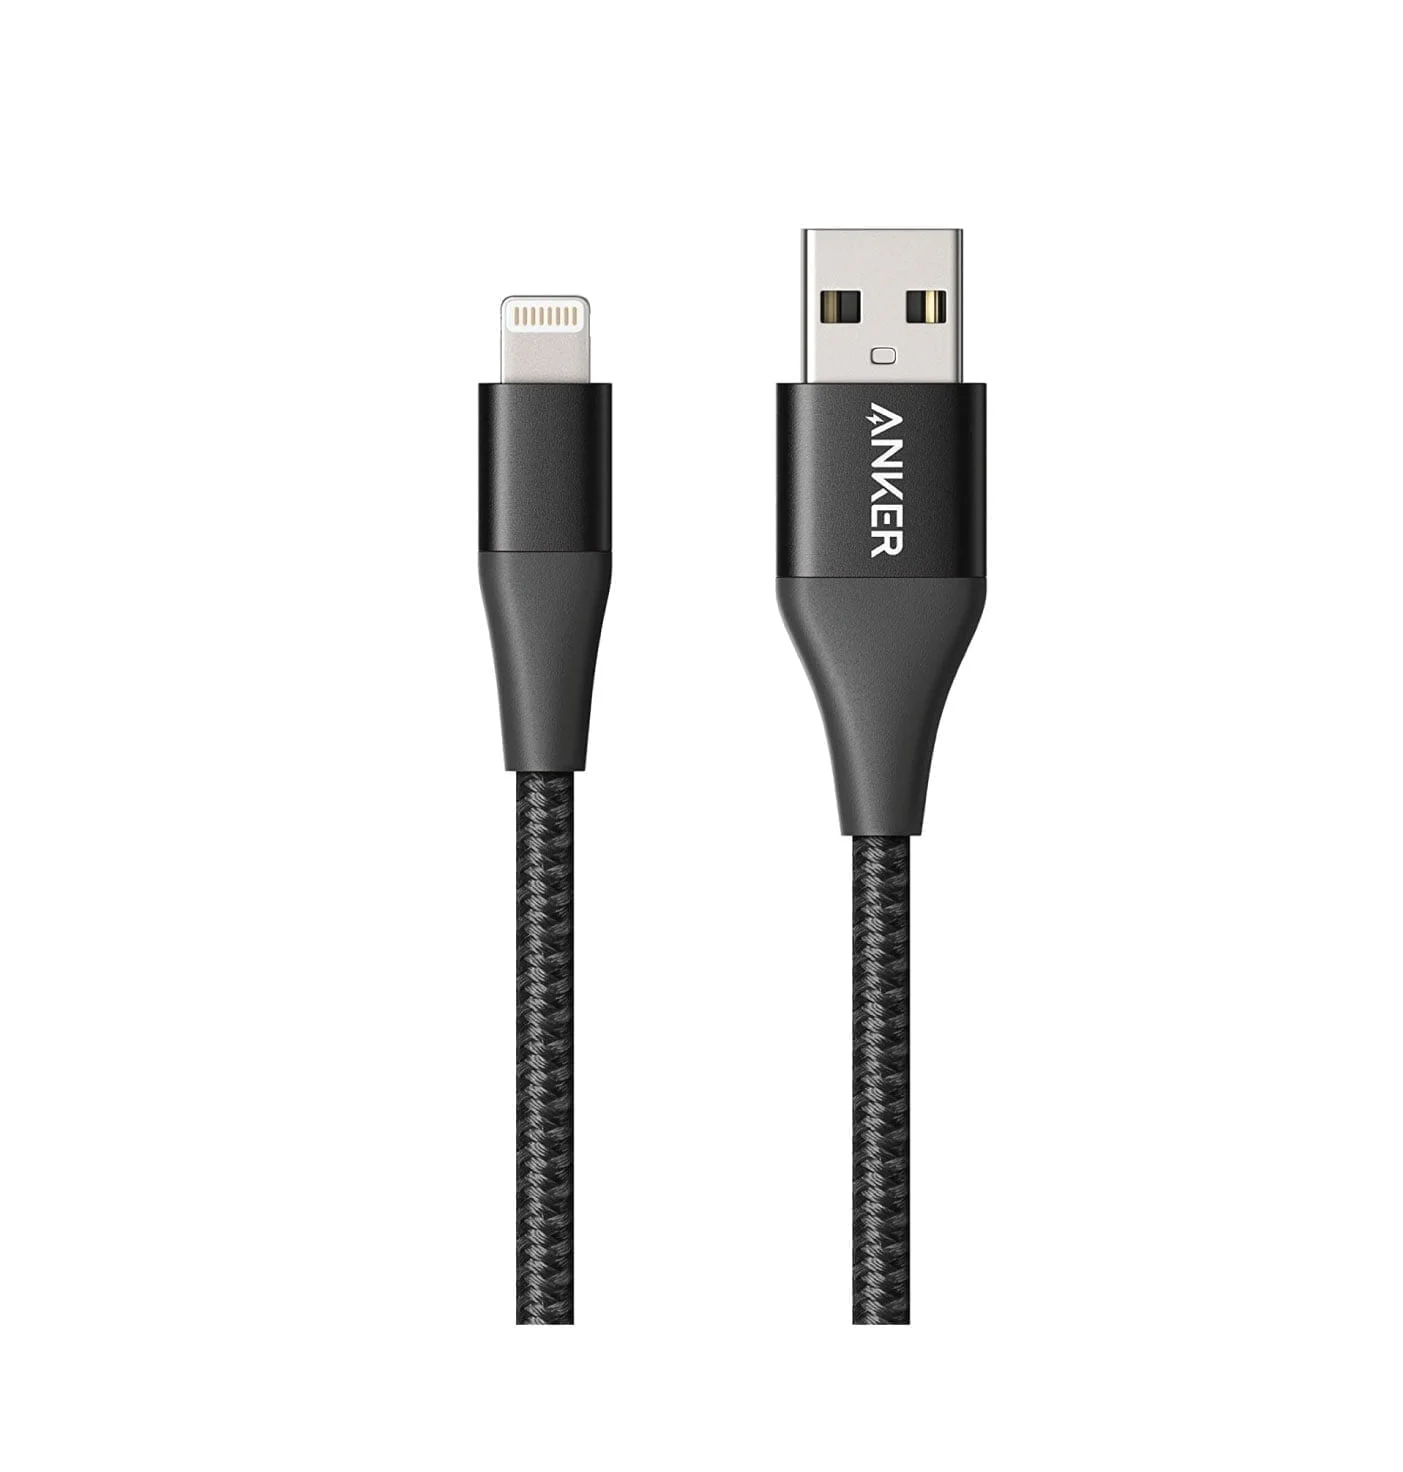 Anker Powerline+ II Lightning Cable (3ft), MFi Certified for Flawless